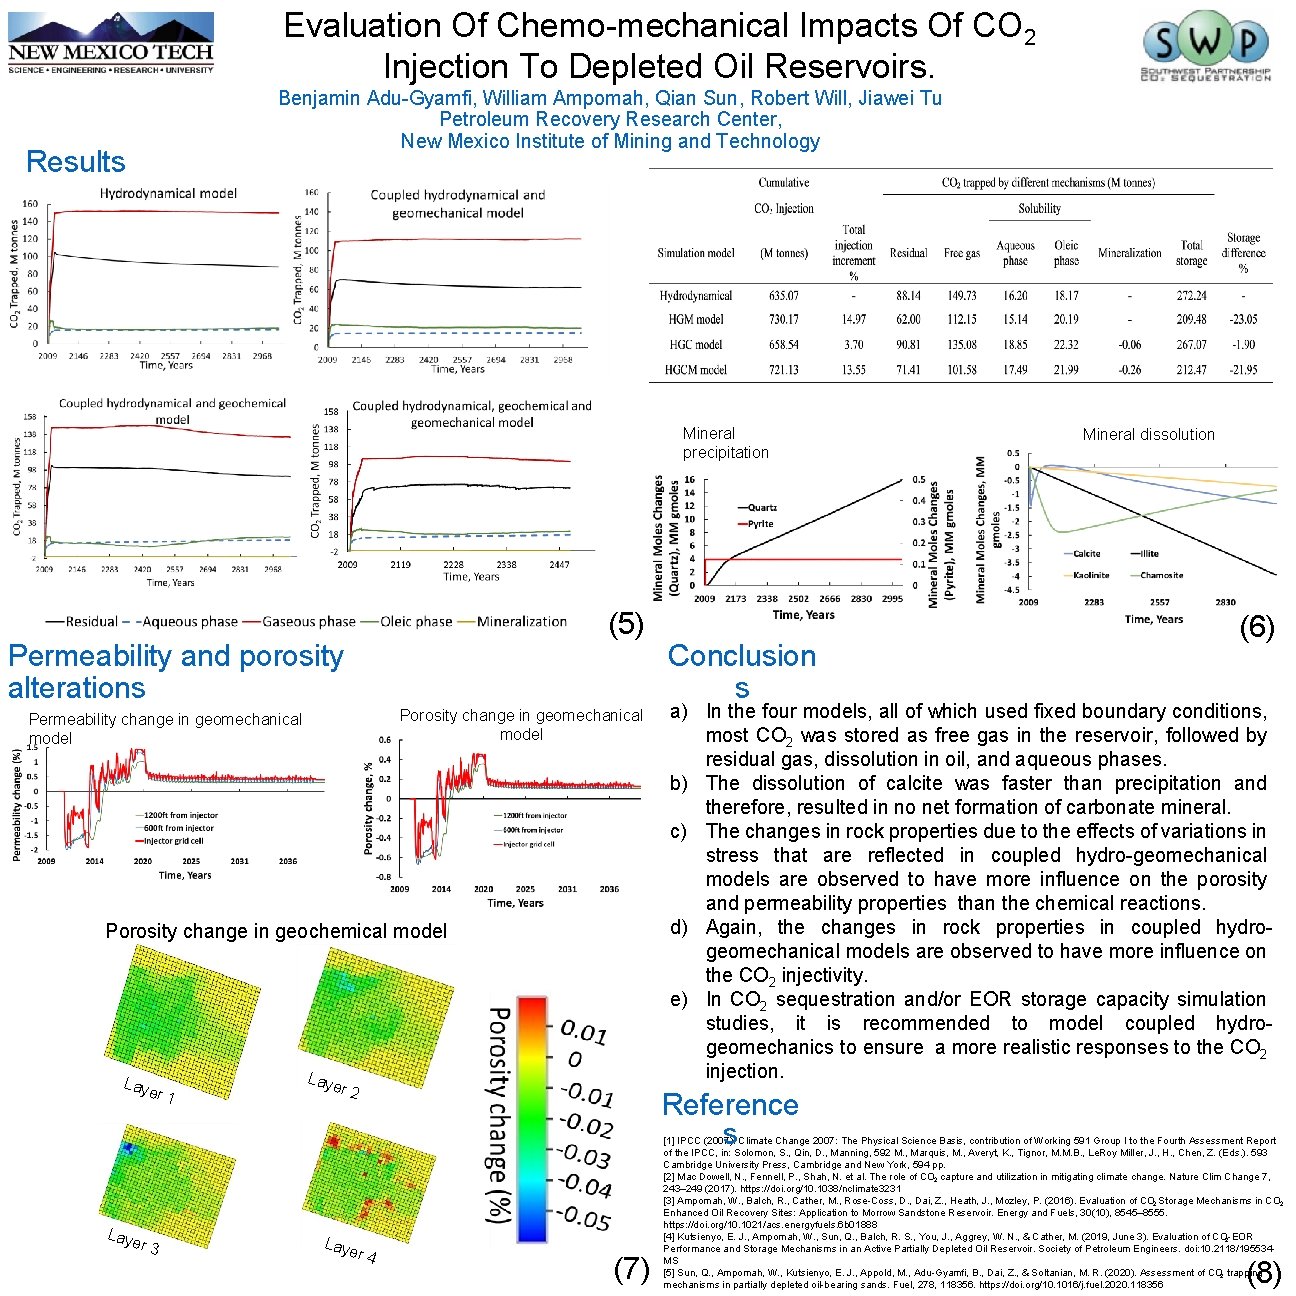 Evaluation Of Chemo-mechanical Impacts Of CO 2 Injection To Depleted Oil Reservoirs. Benjamin Adu-Gyamfi,